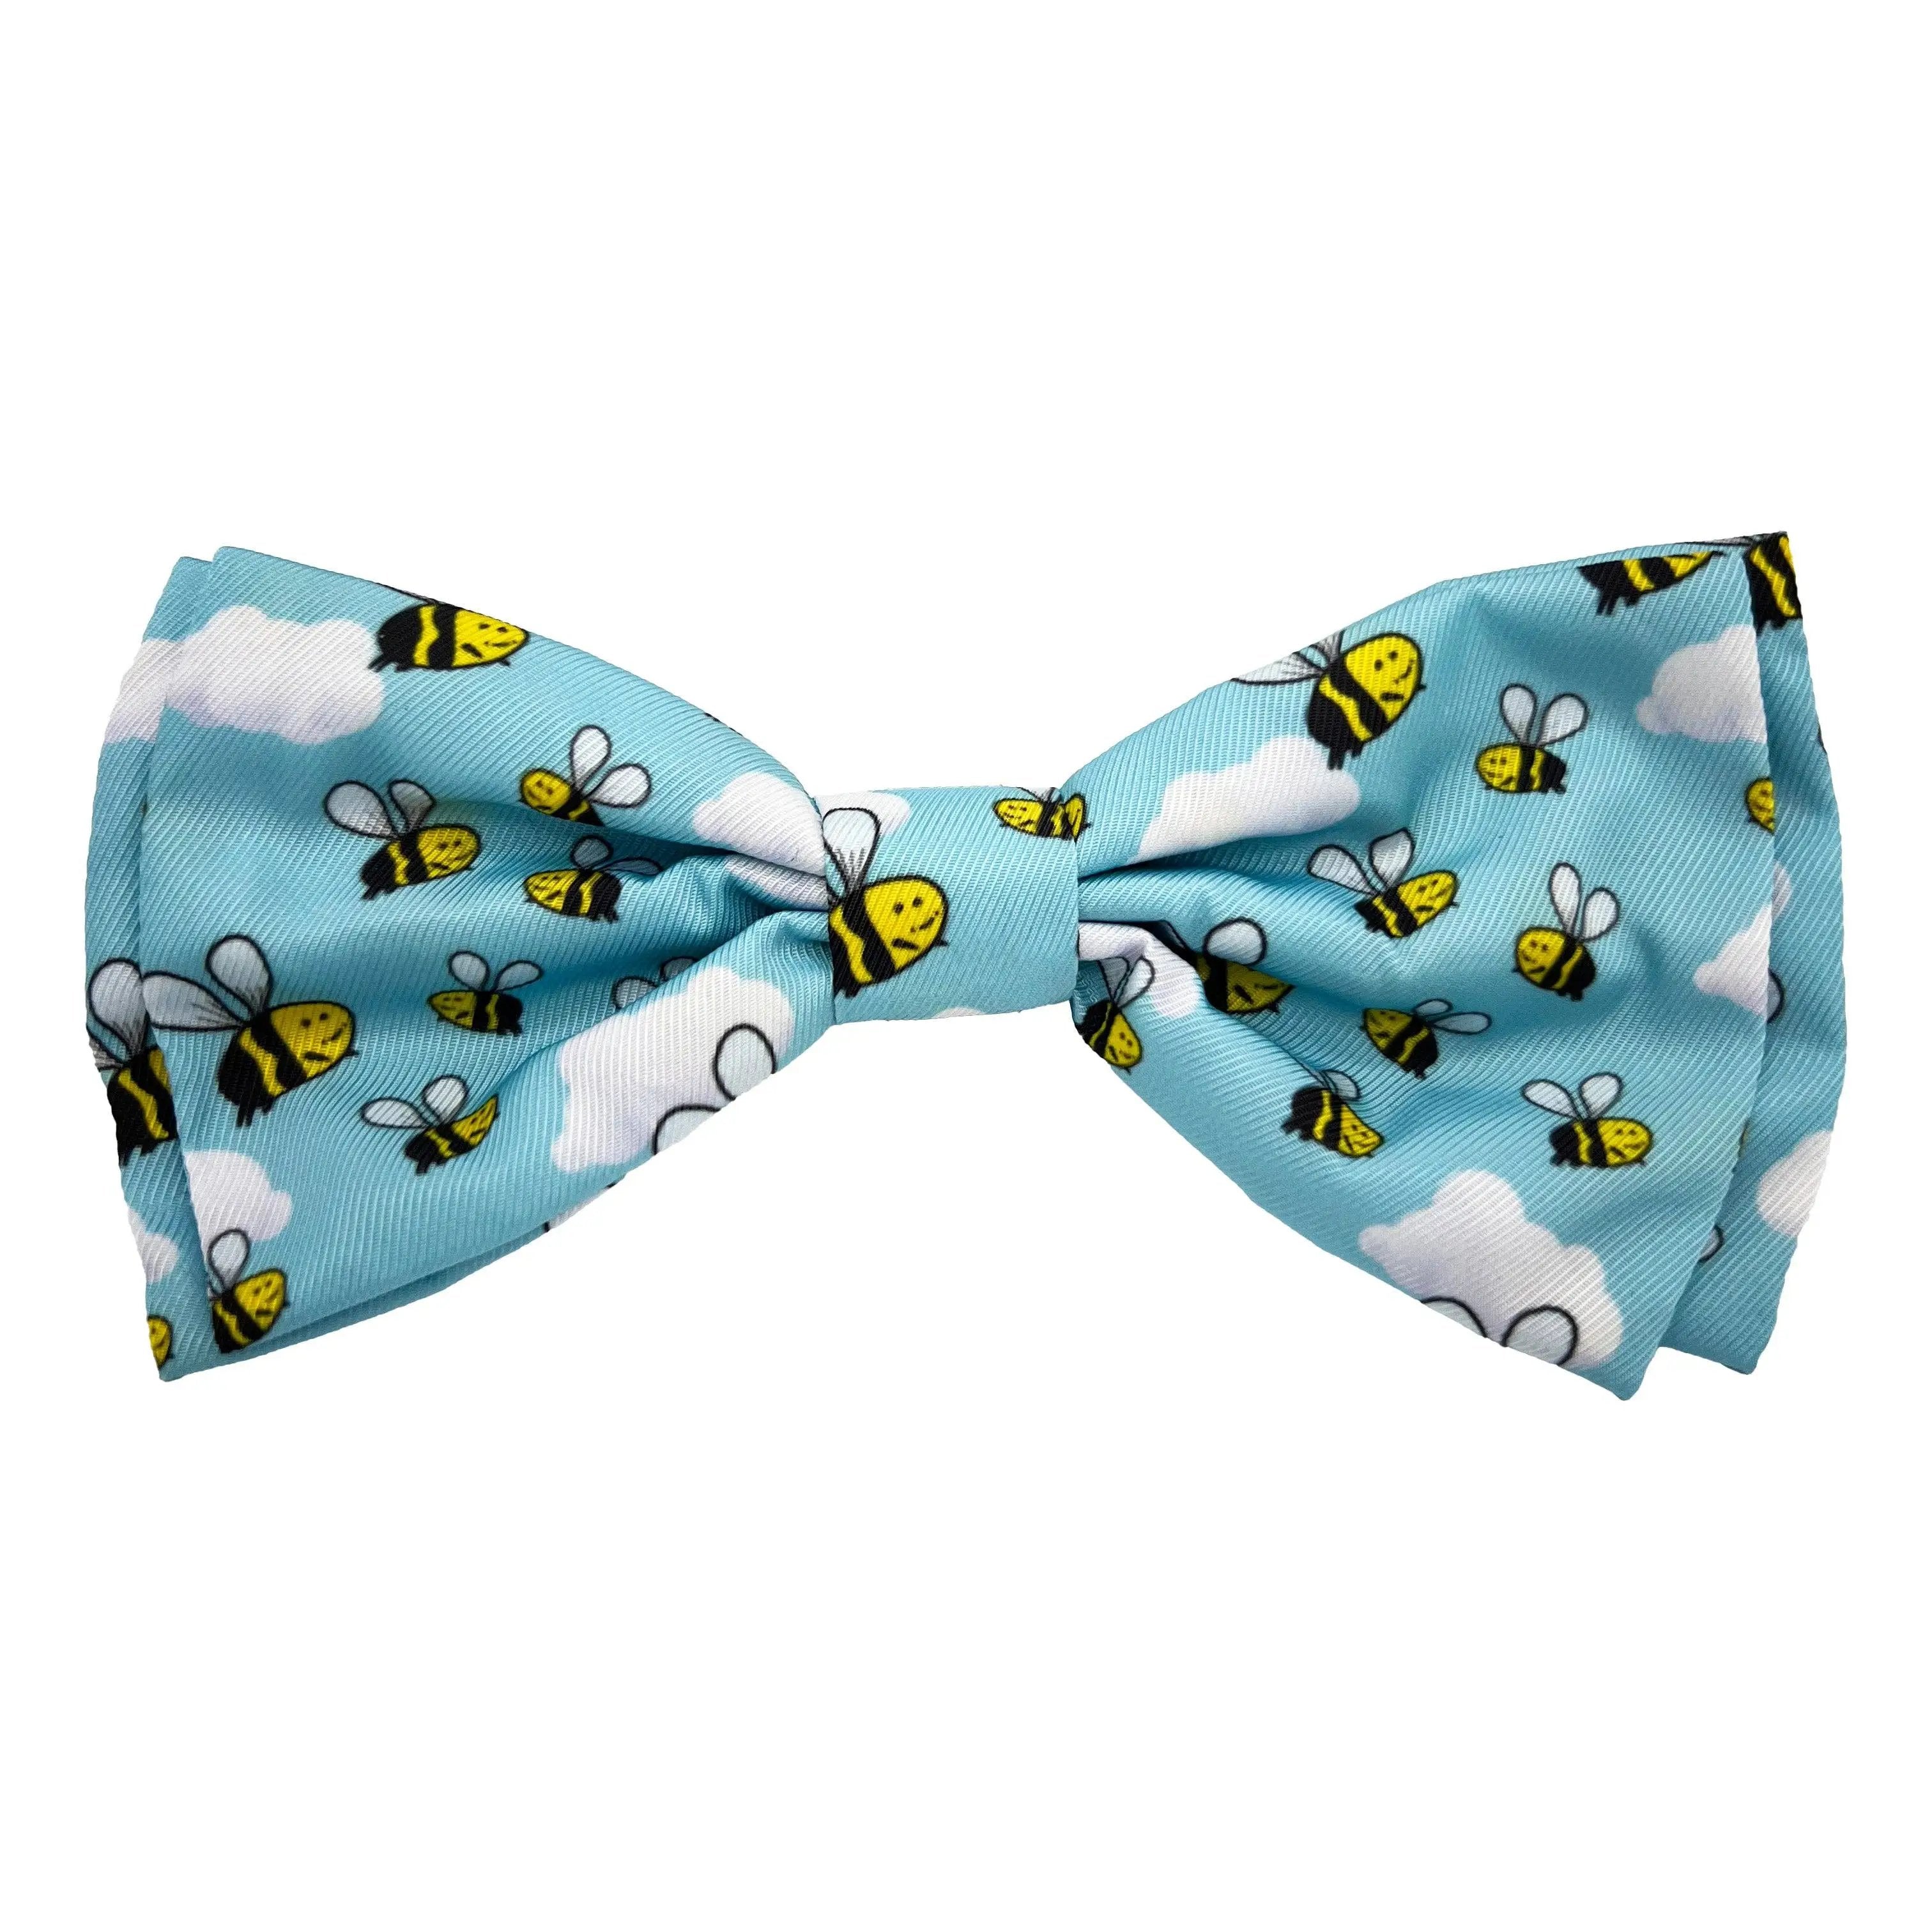 Huxley & Kent Busy Bees Bow Tie